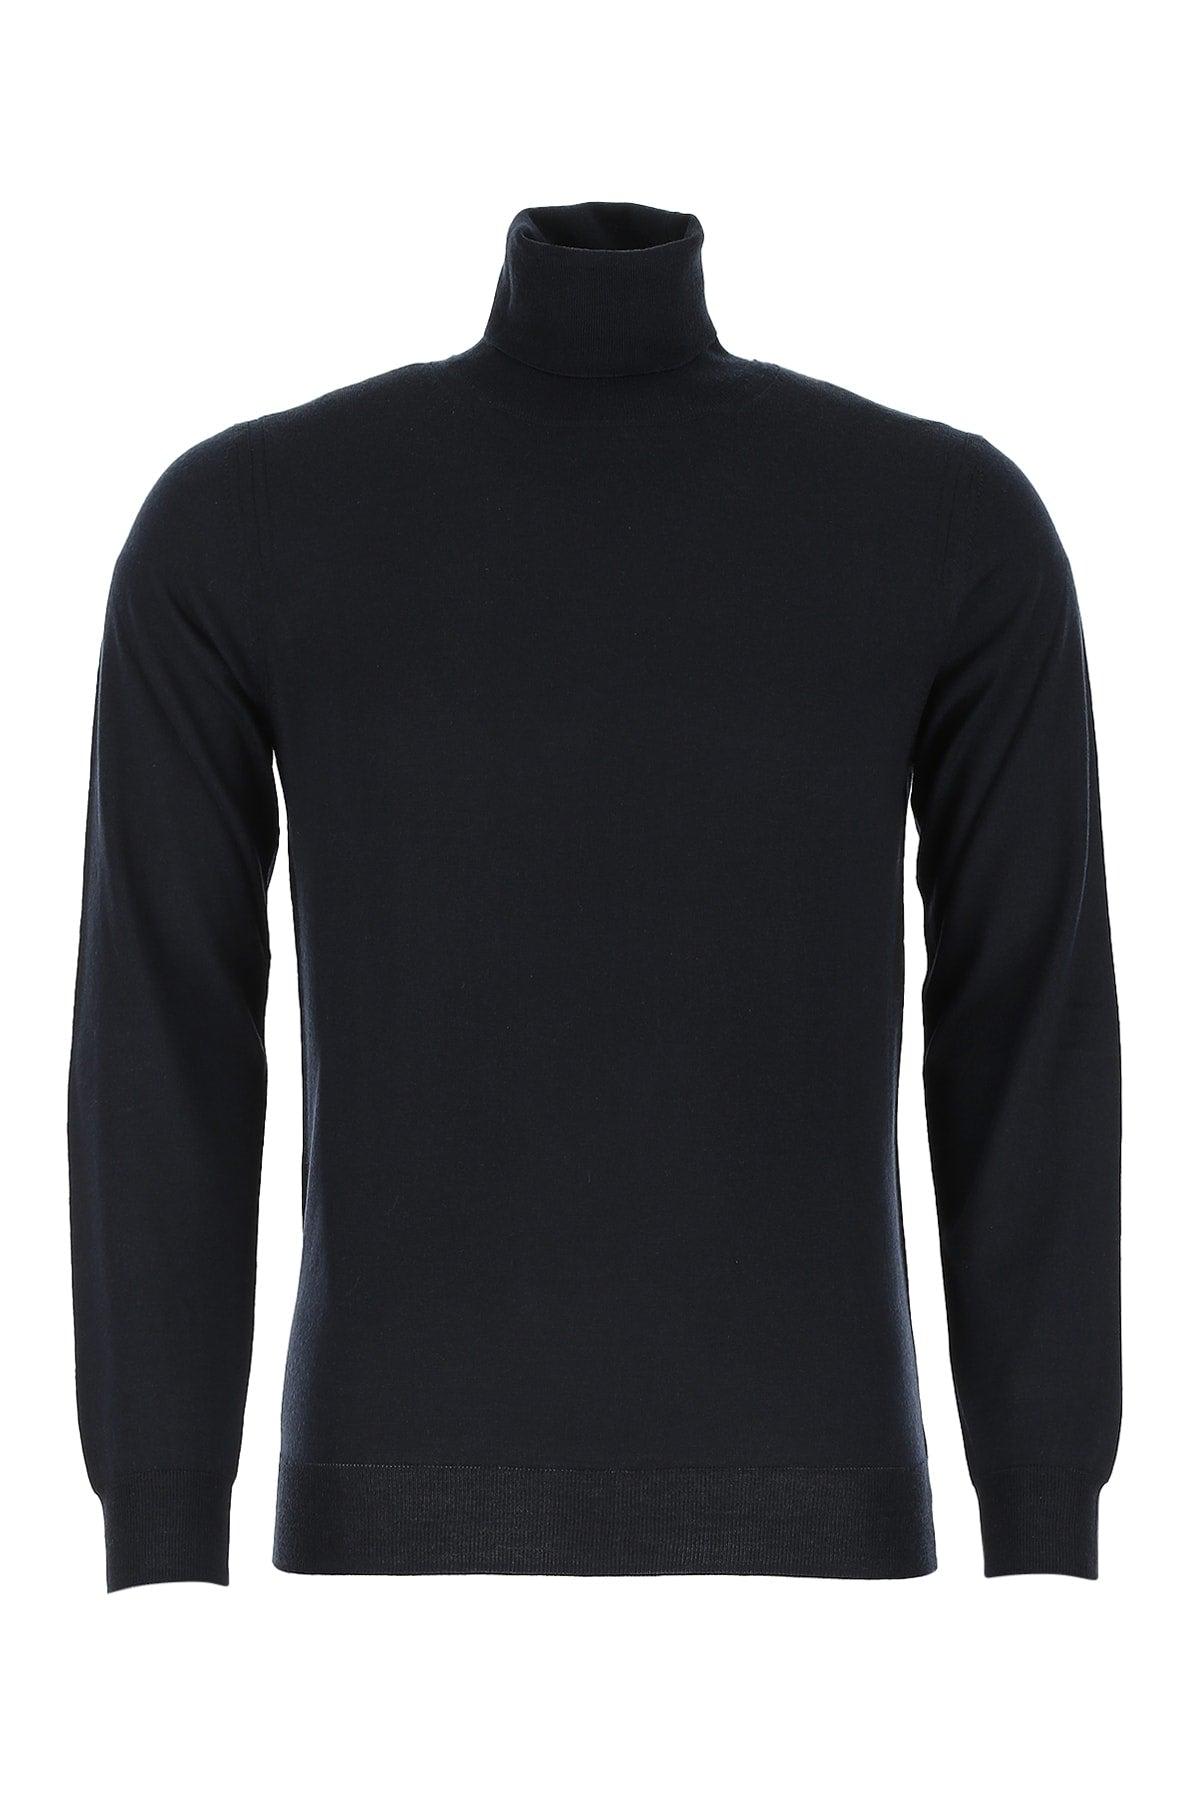 Paolo Pecora Roll Neck Knitted Jumper Paolo Pecora